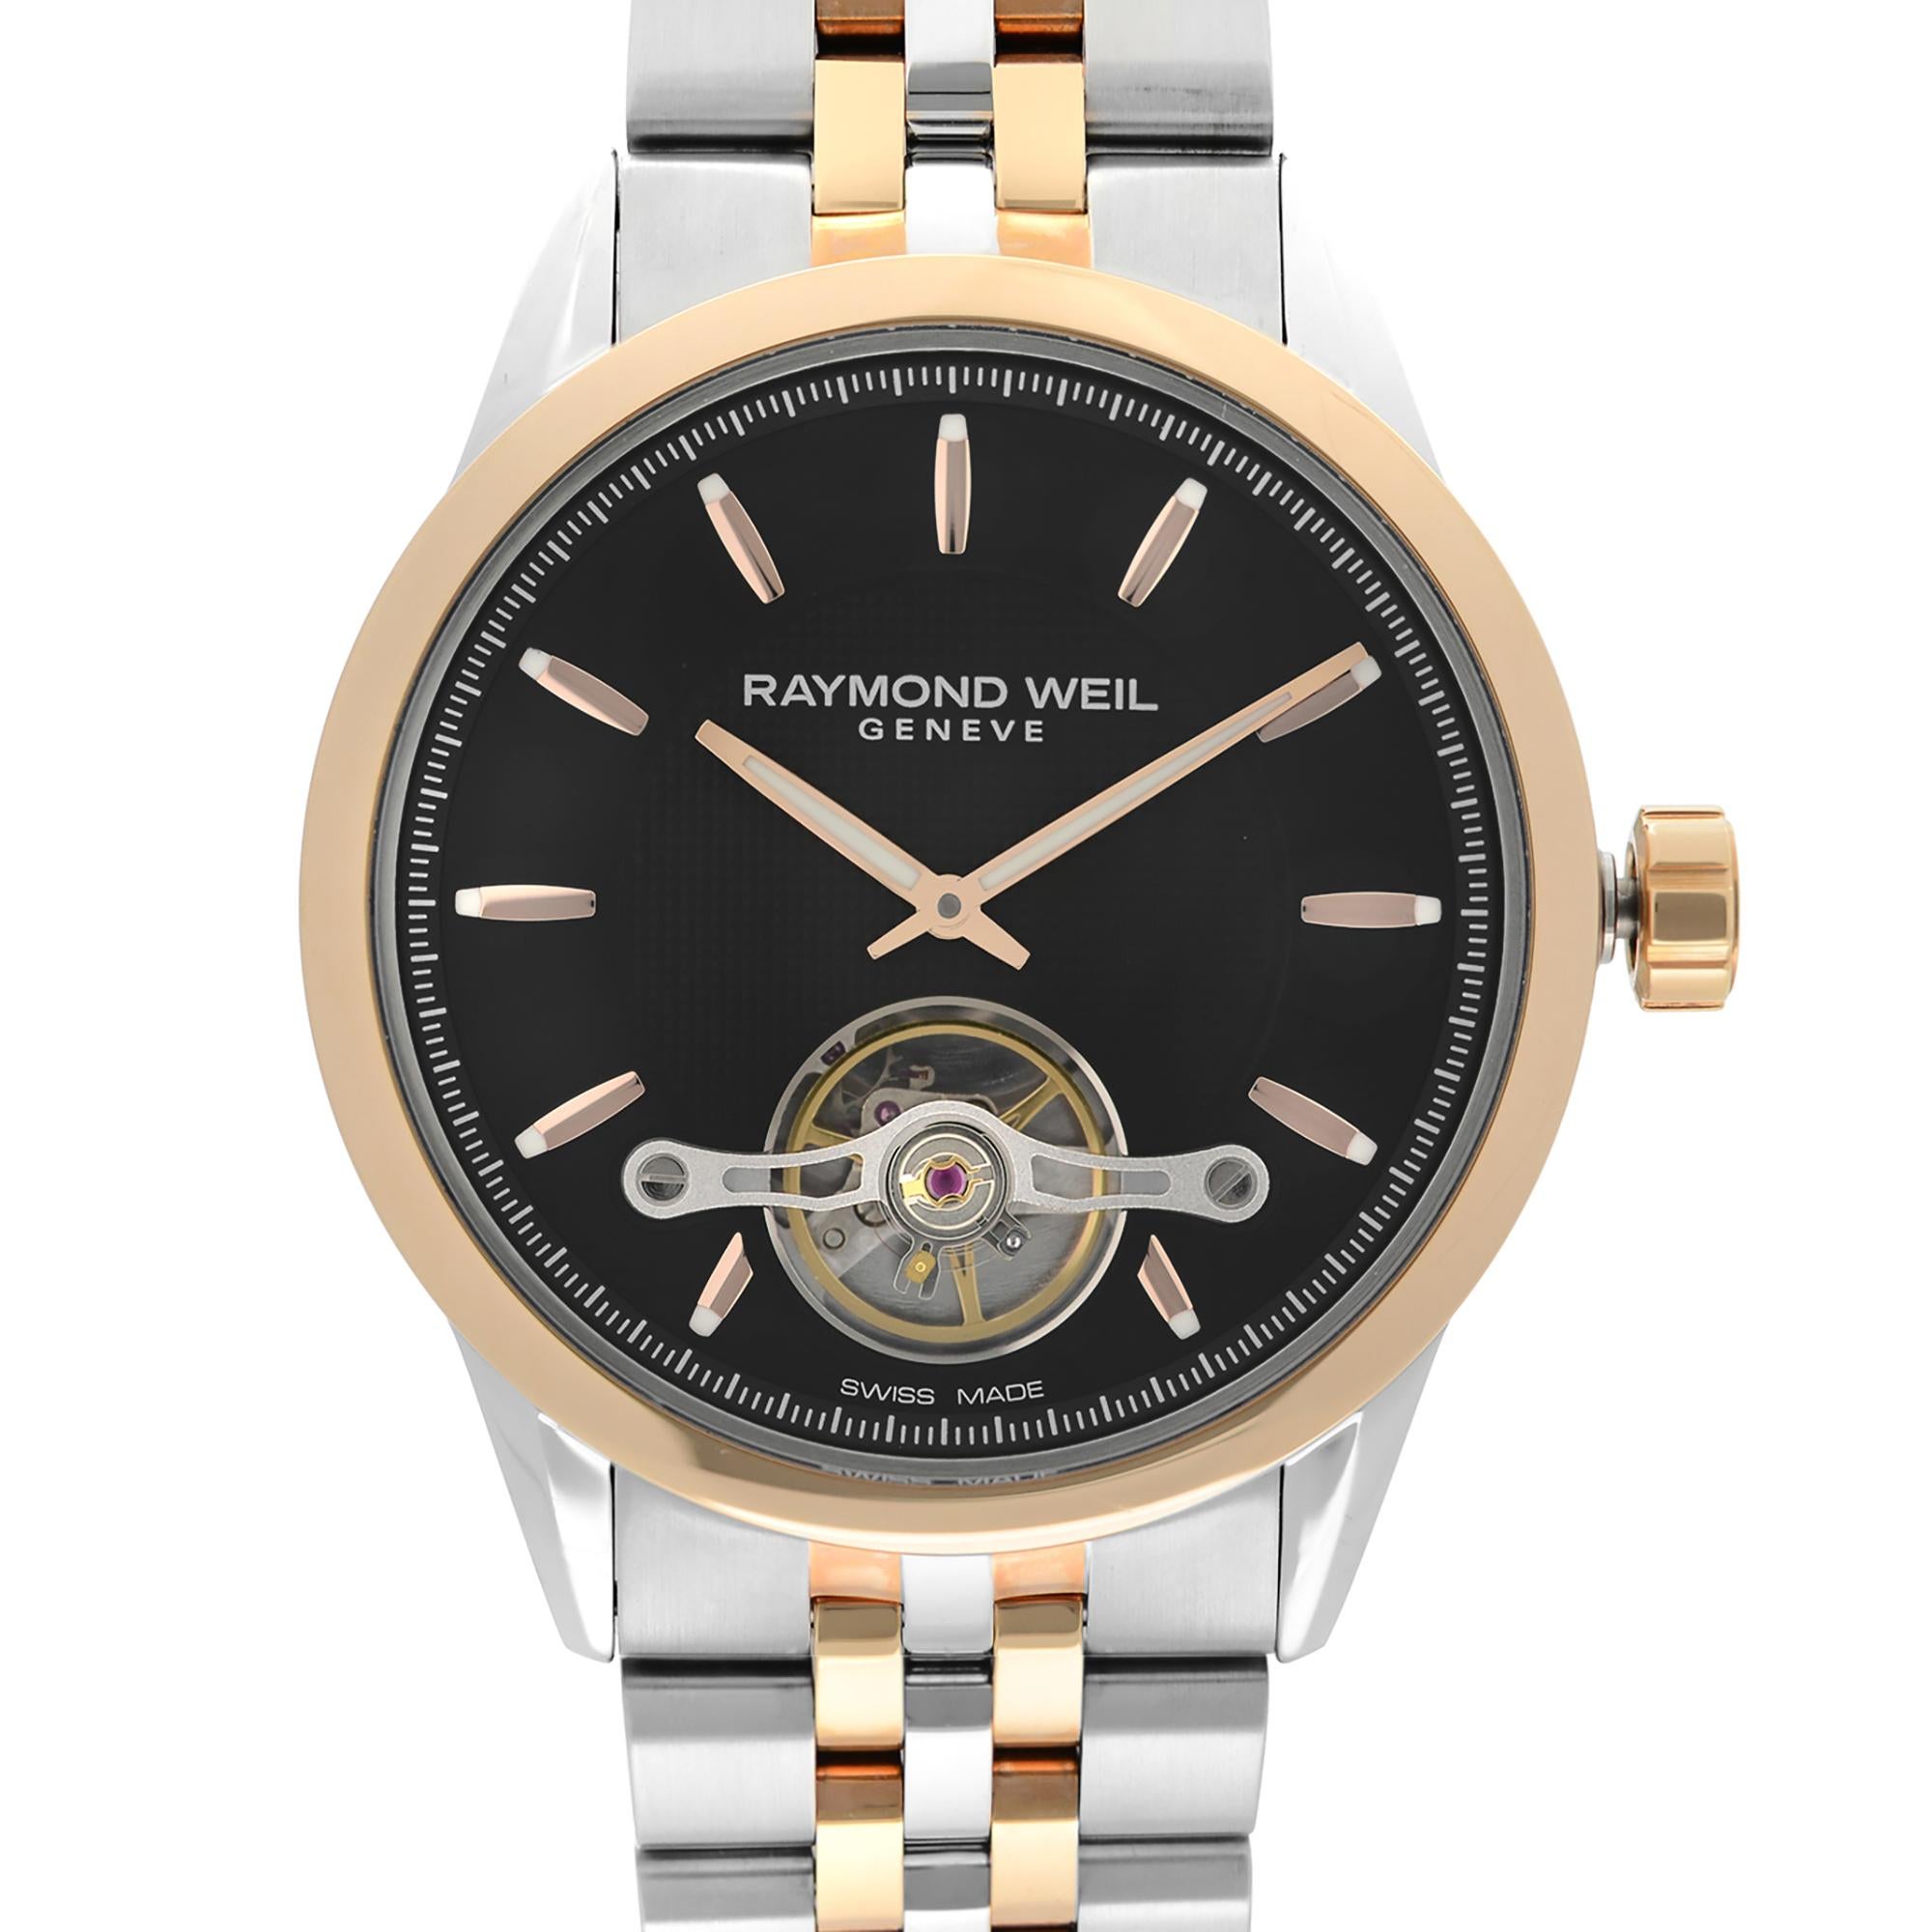 New Raymond Weil Freelancer 42.5mm Two-Tone Steel Black Openworked Index Dial Automatic Men's Watch. Manufacturer's box and papers are included. A 3-year warranty provided by Chronostore is included. 
Details:
MSRP 2200
Brand RAYMOND WEIL
Department